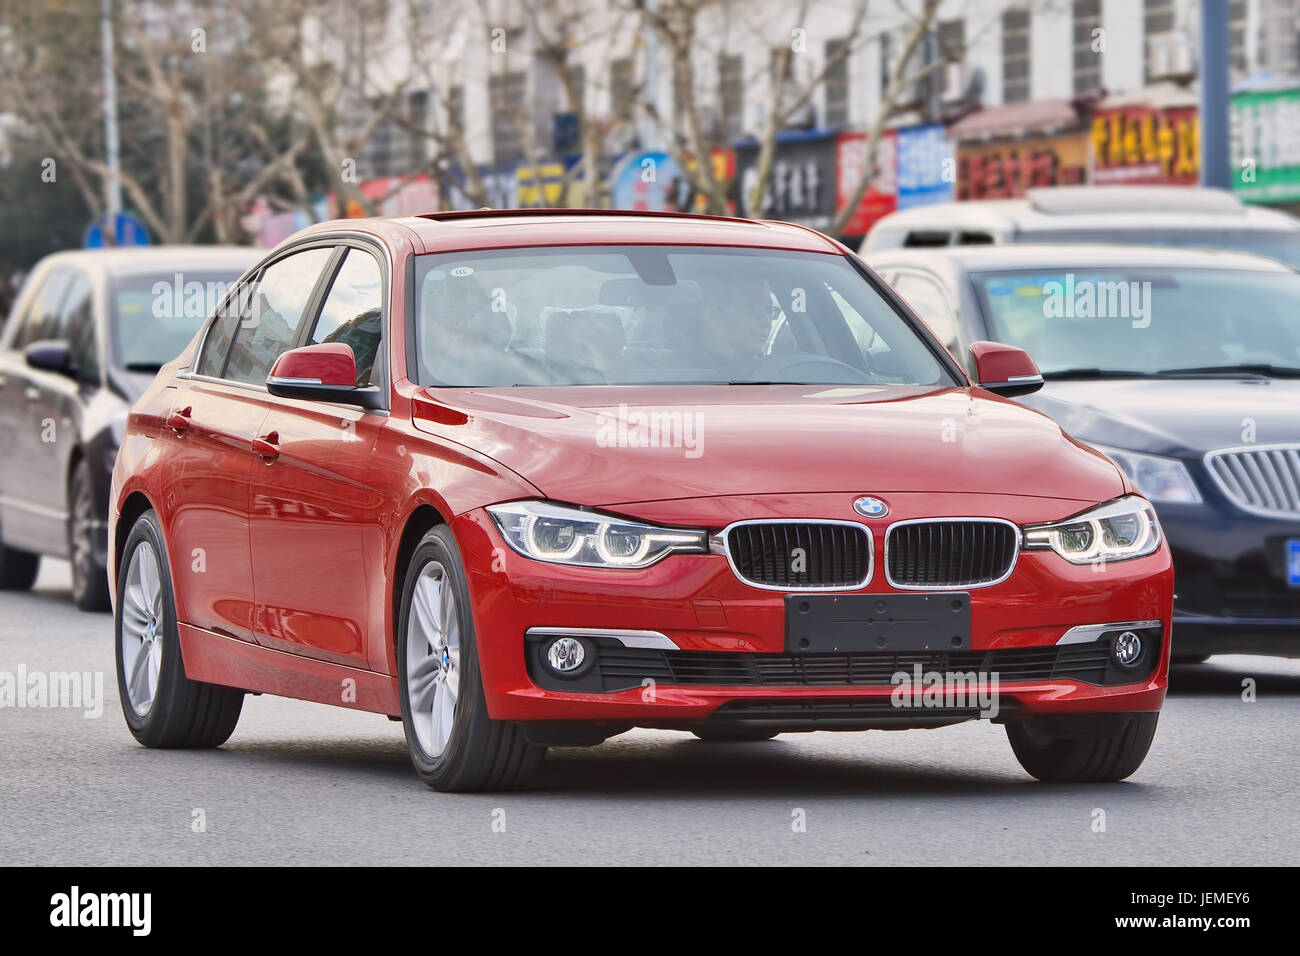 BMW 3 series on the road. BMW sales will be hit in 2016 by strong competition, slowing Chinese economy and crackdown on conspicuous consumption. Stock Photo